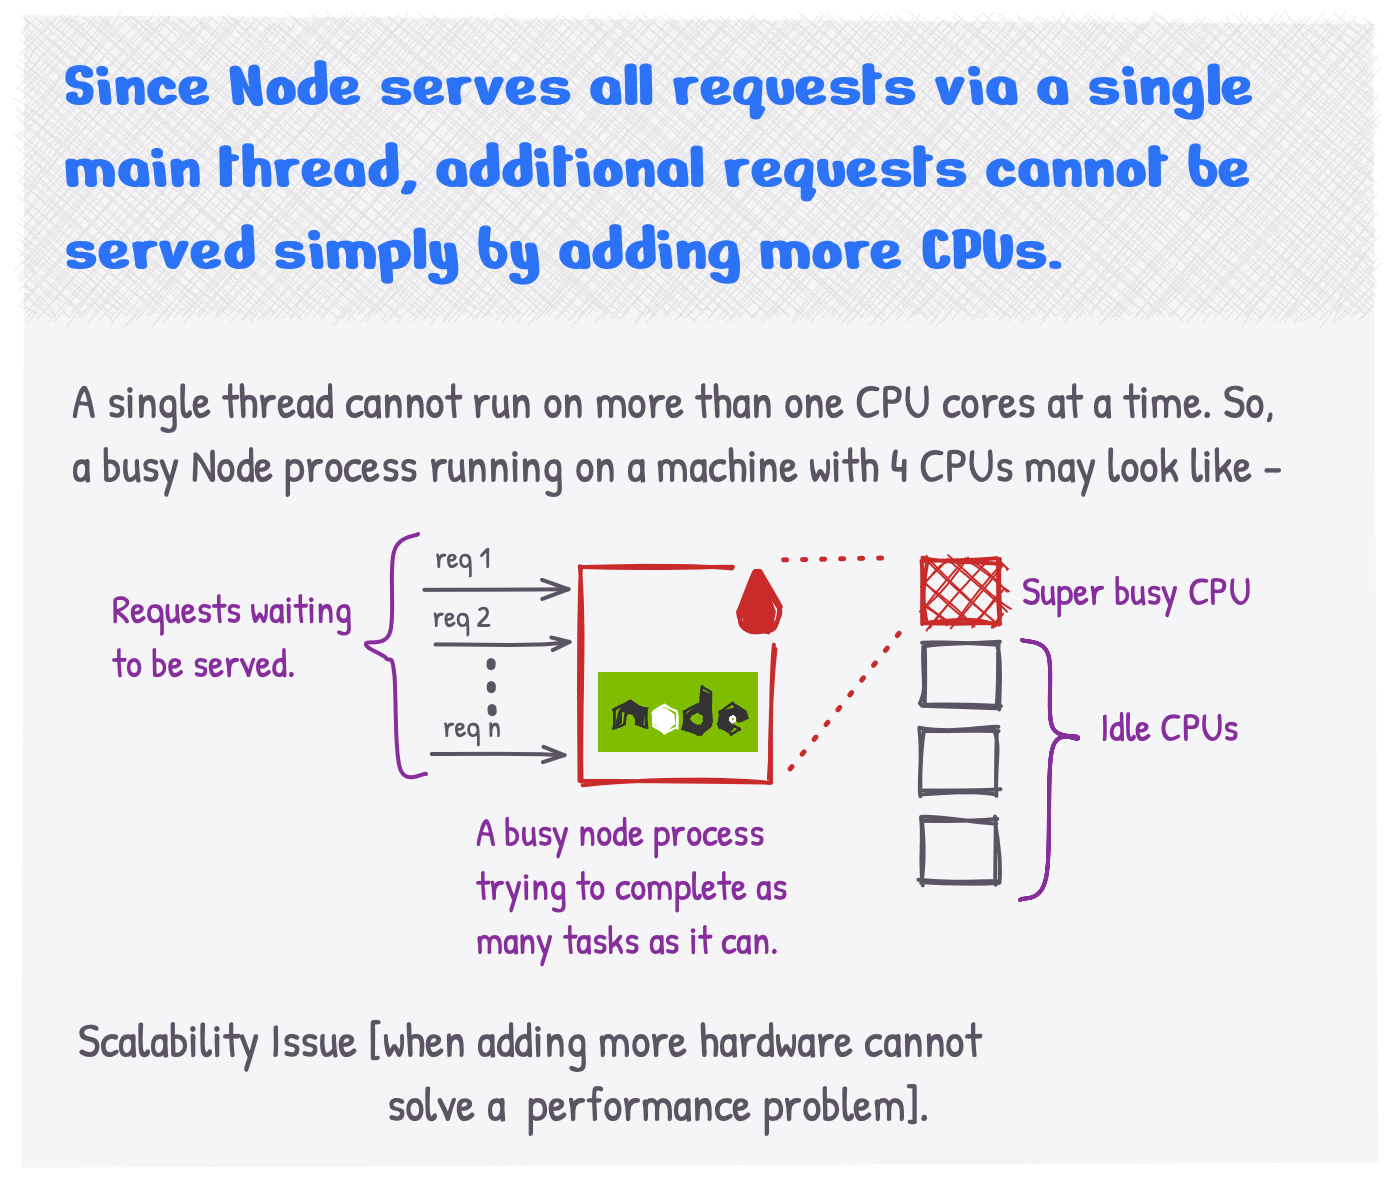 Because Node.js is single threaded, adding additional CPU cores cannot solve the scalability issues.